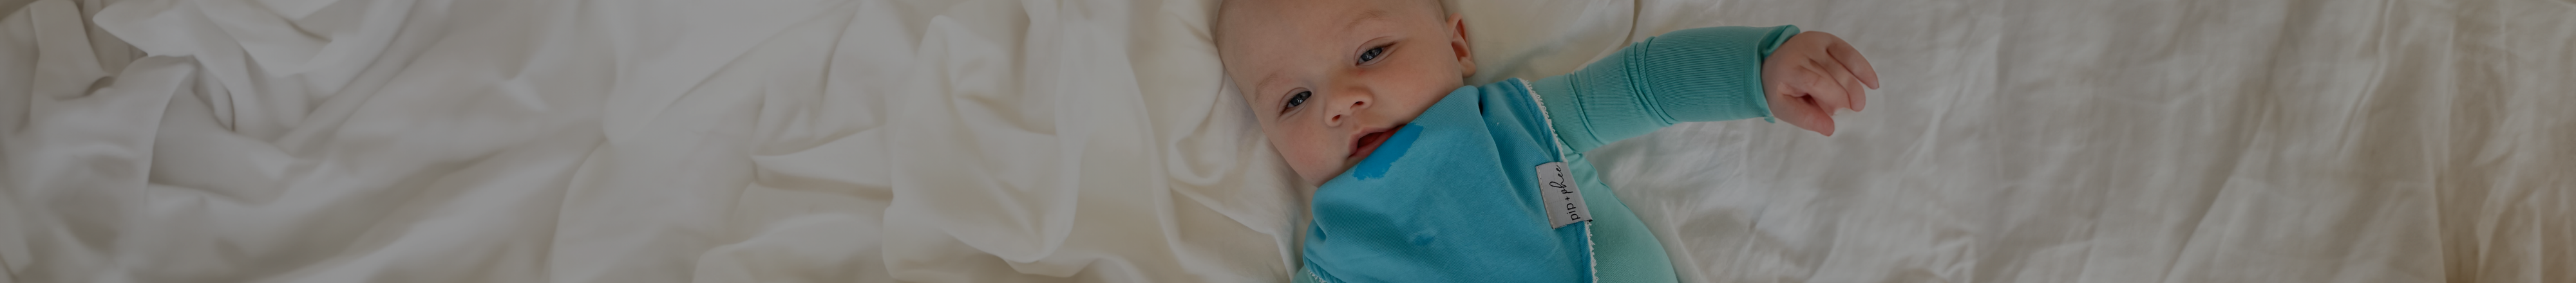 Baby laying on bed wearing a blue Pip + Phee sleeper and matching bib